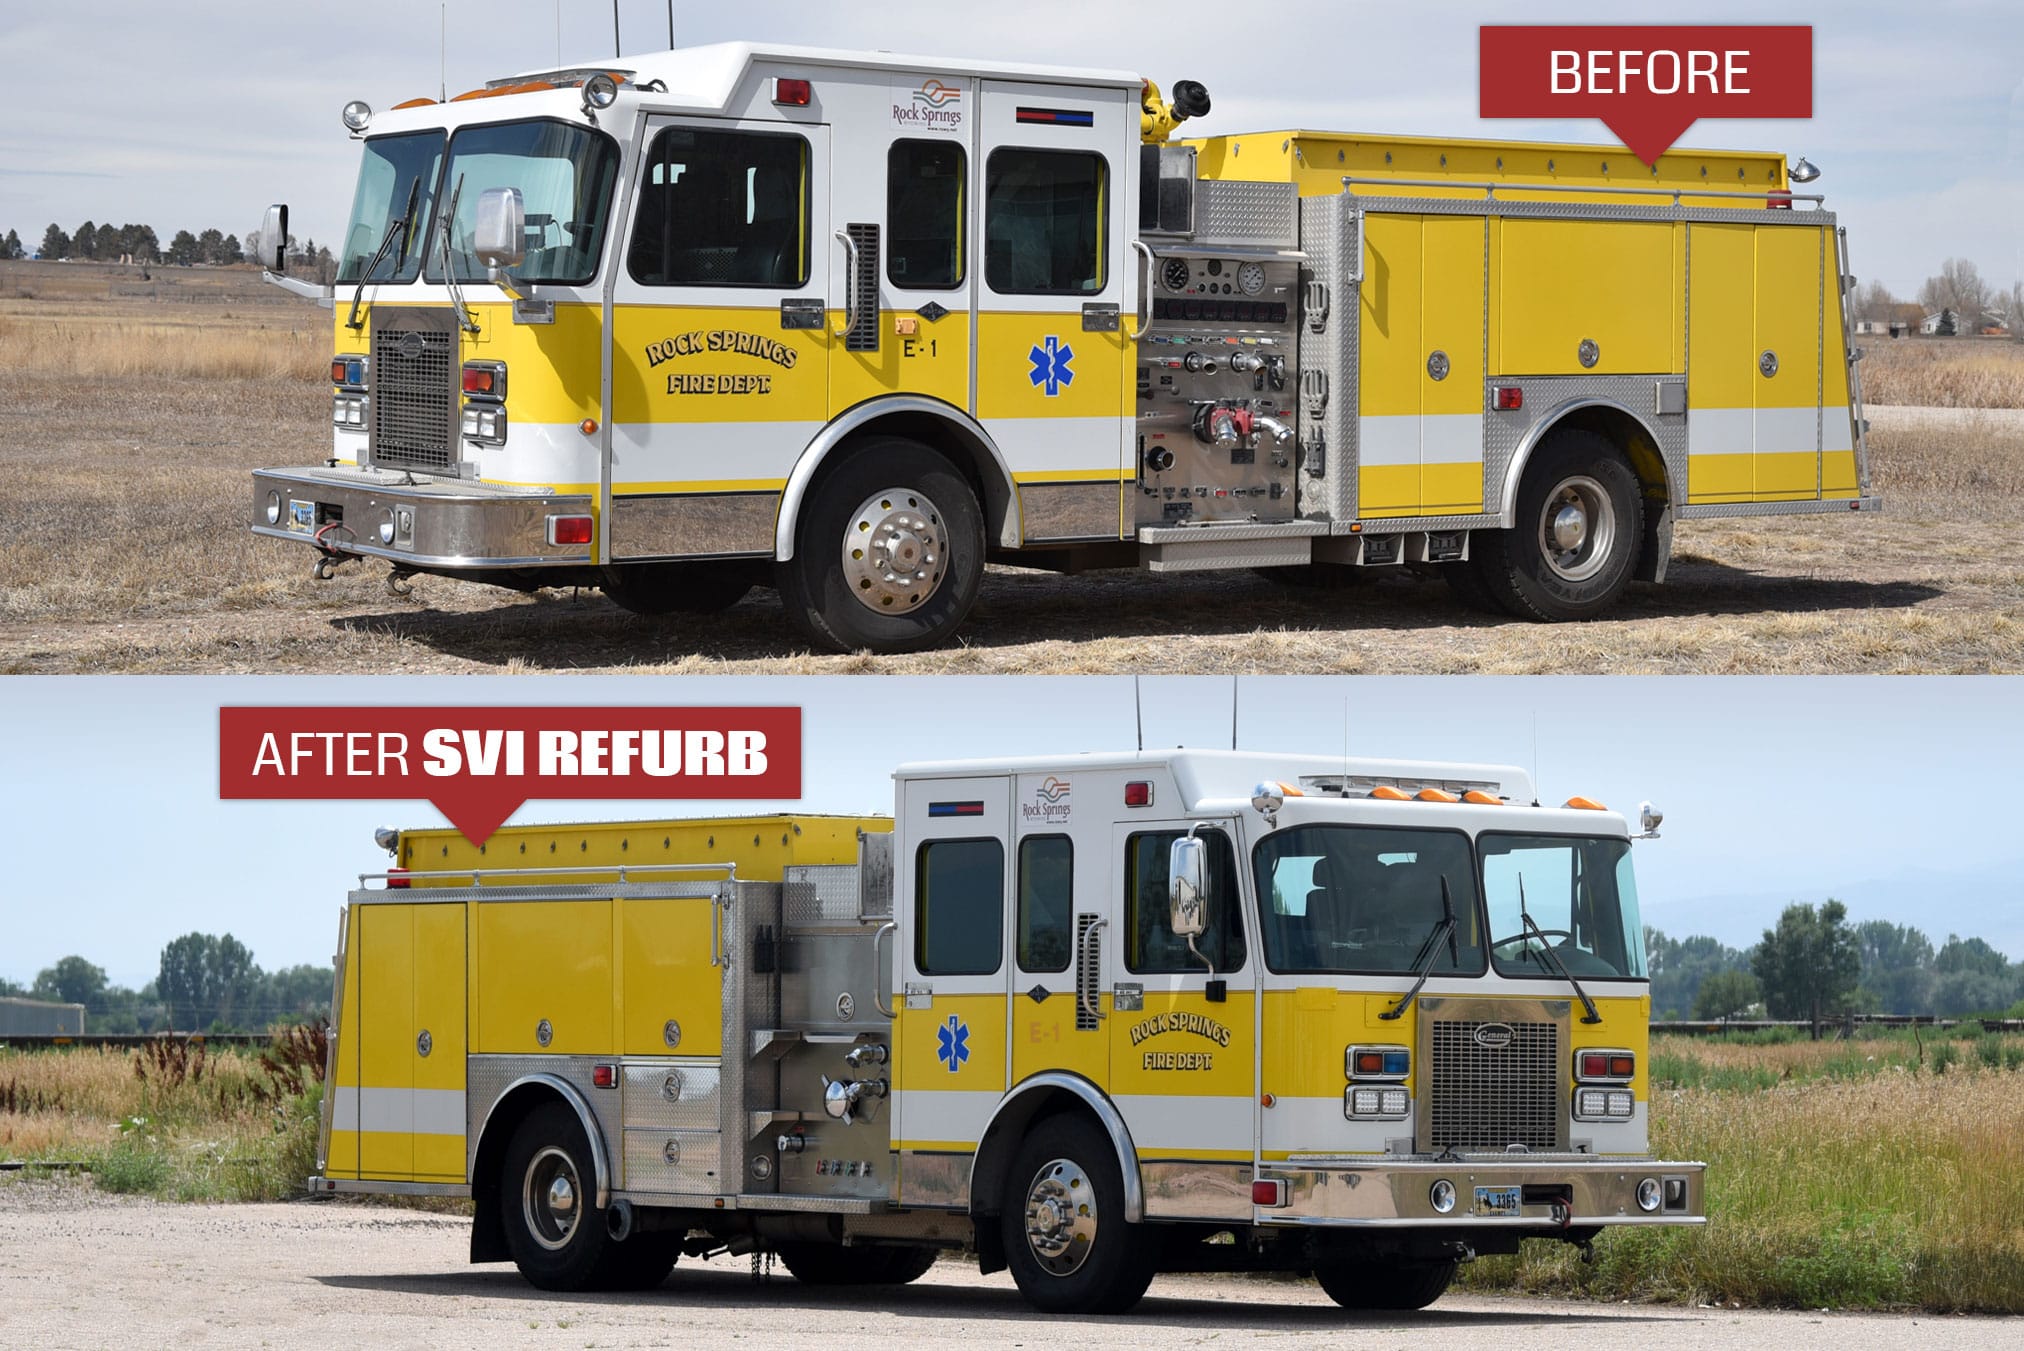 Featured image for “Rock Springs, WY Pumper Refurb”